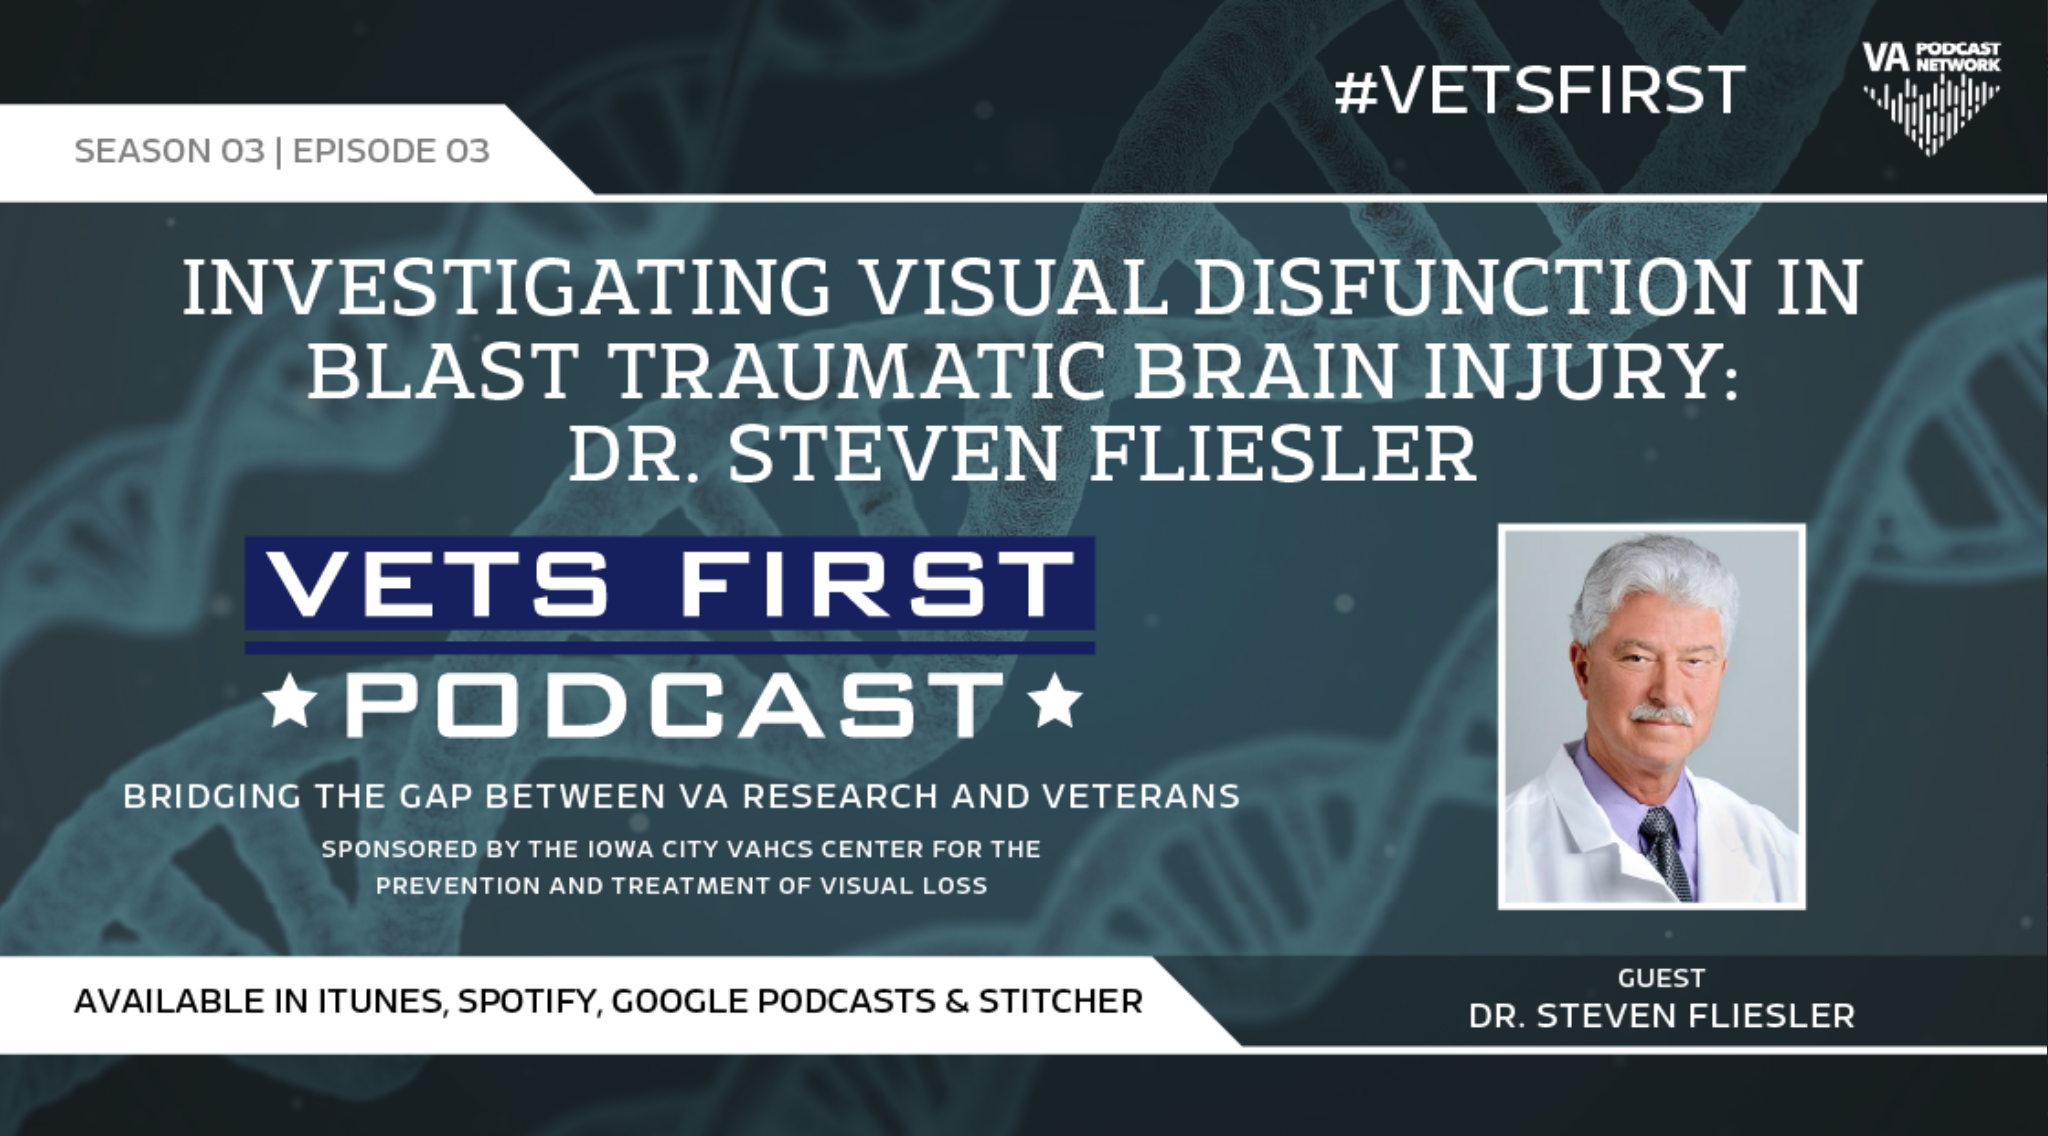 Vets First Podcast graphic